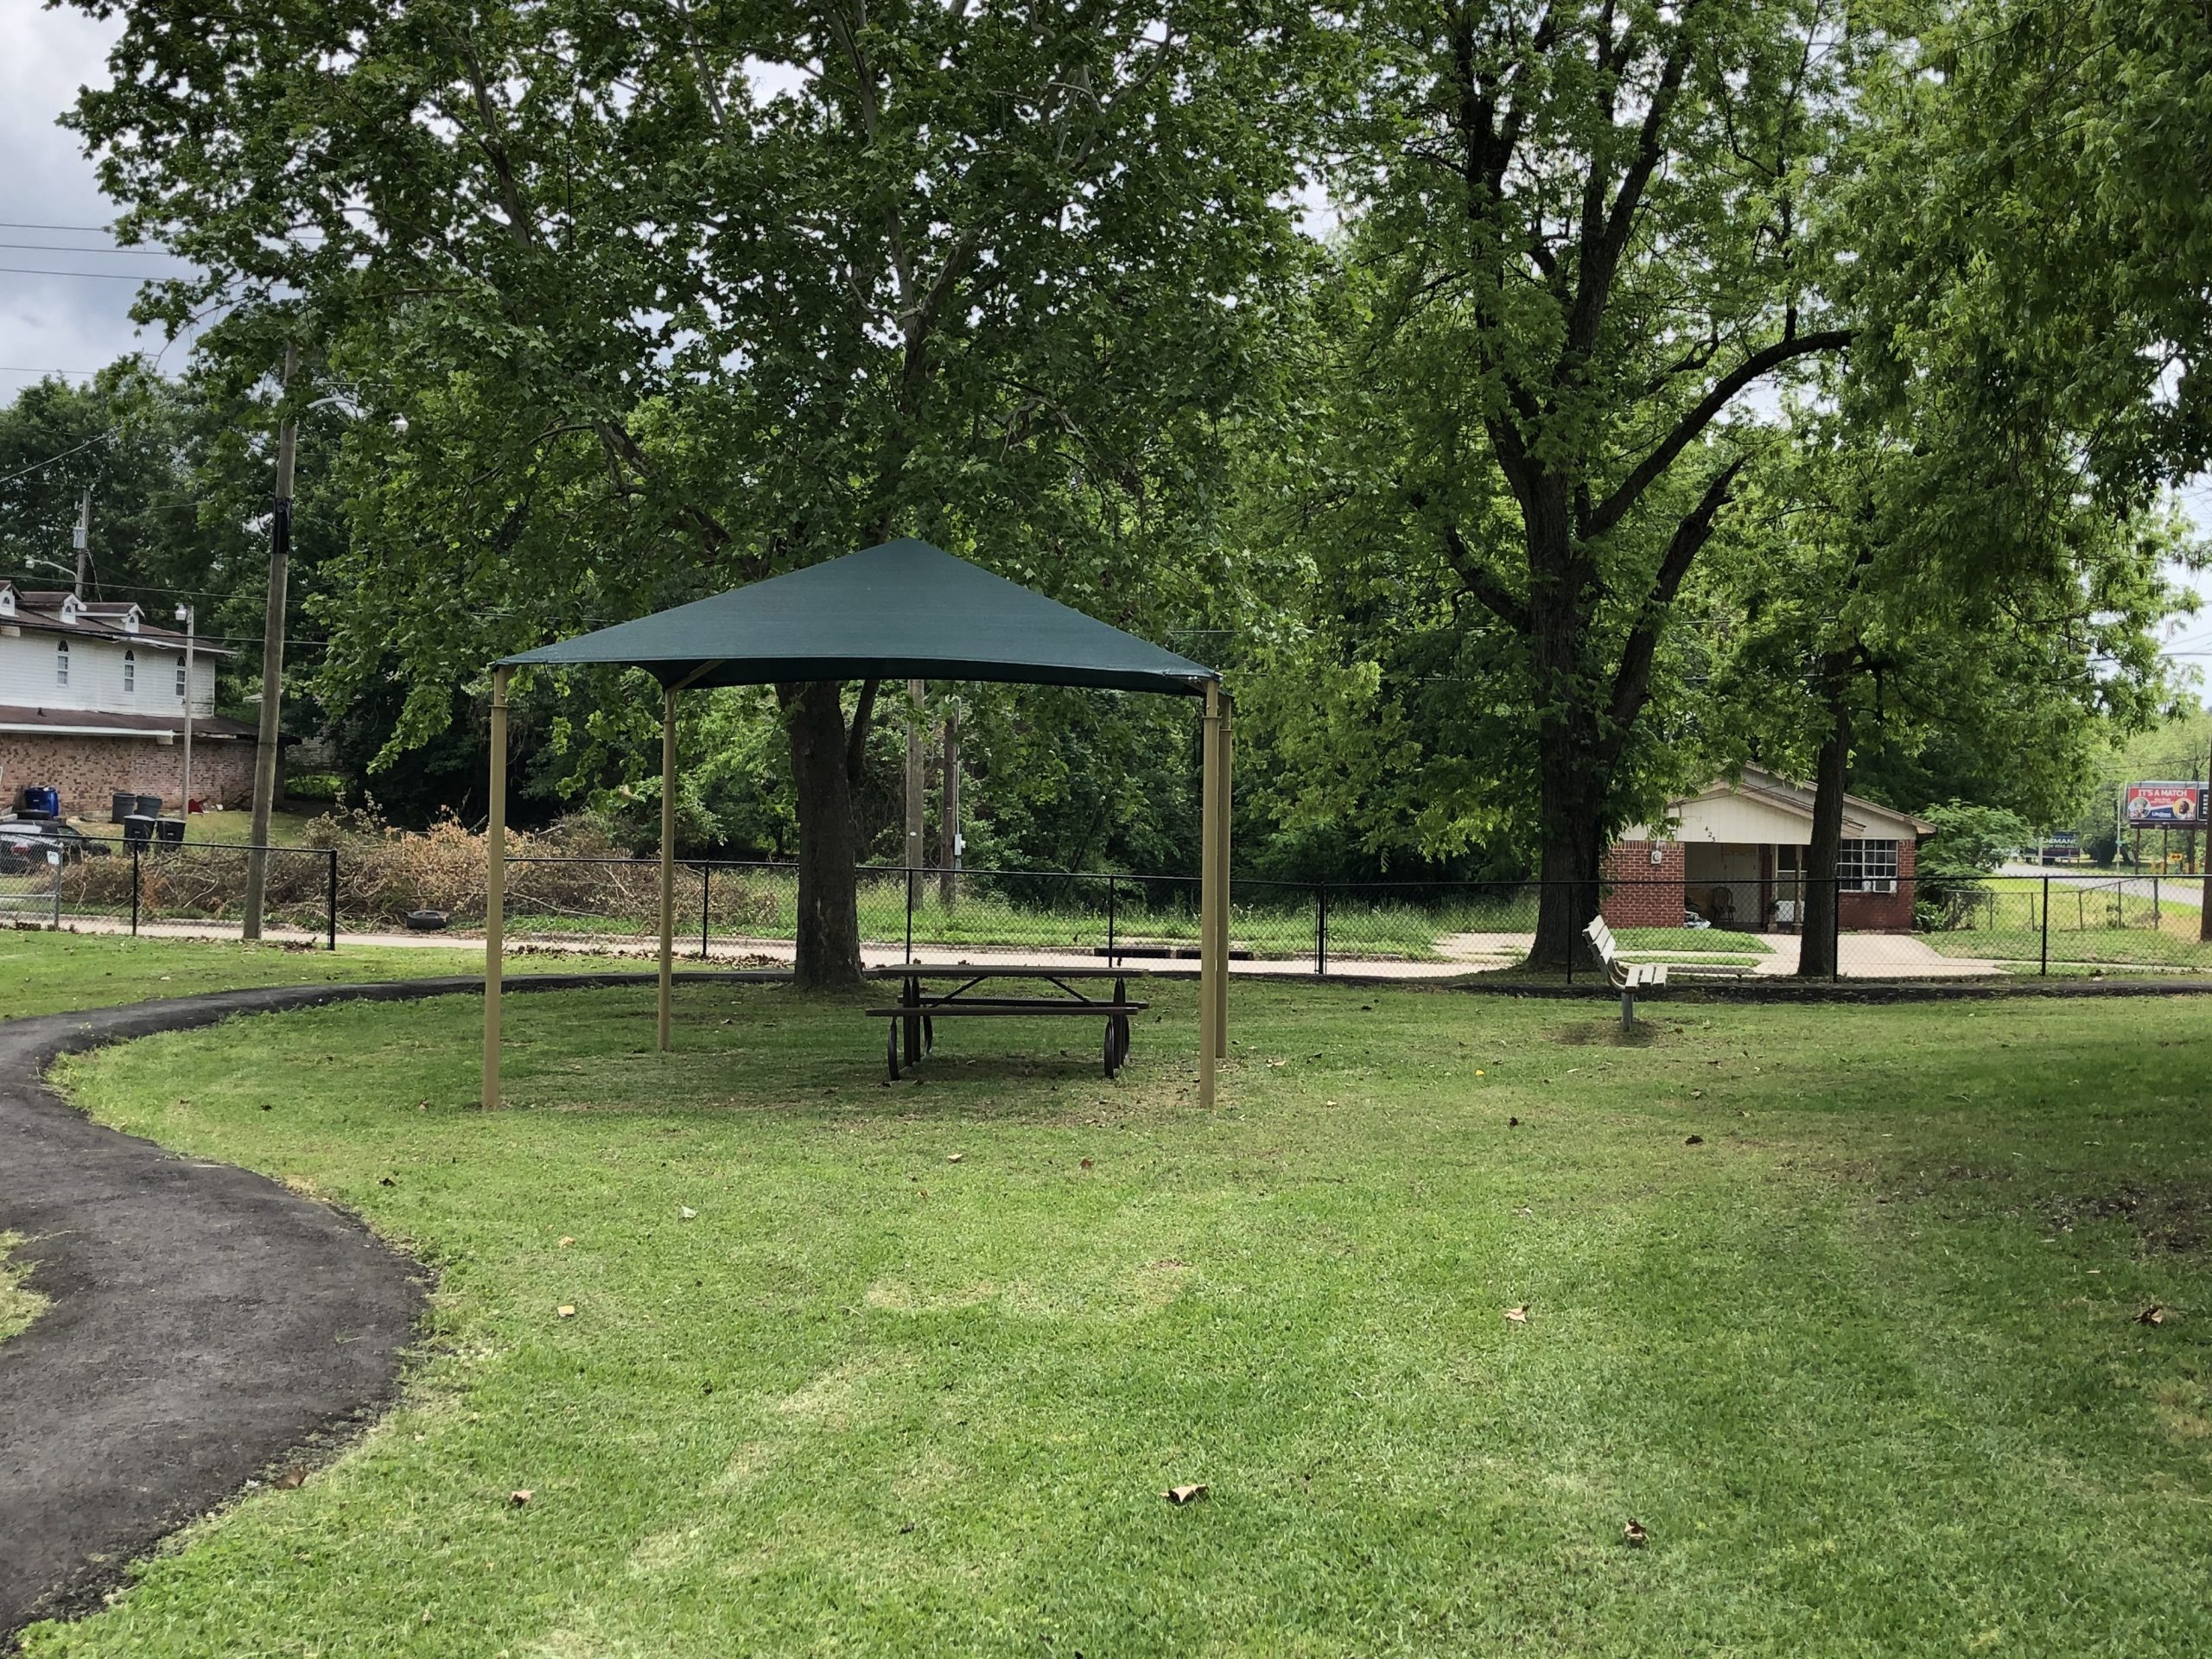 Featured image for “Bessie D. Smith Park gains shade covering”